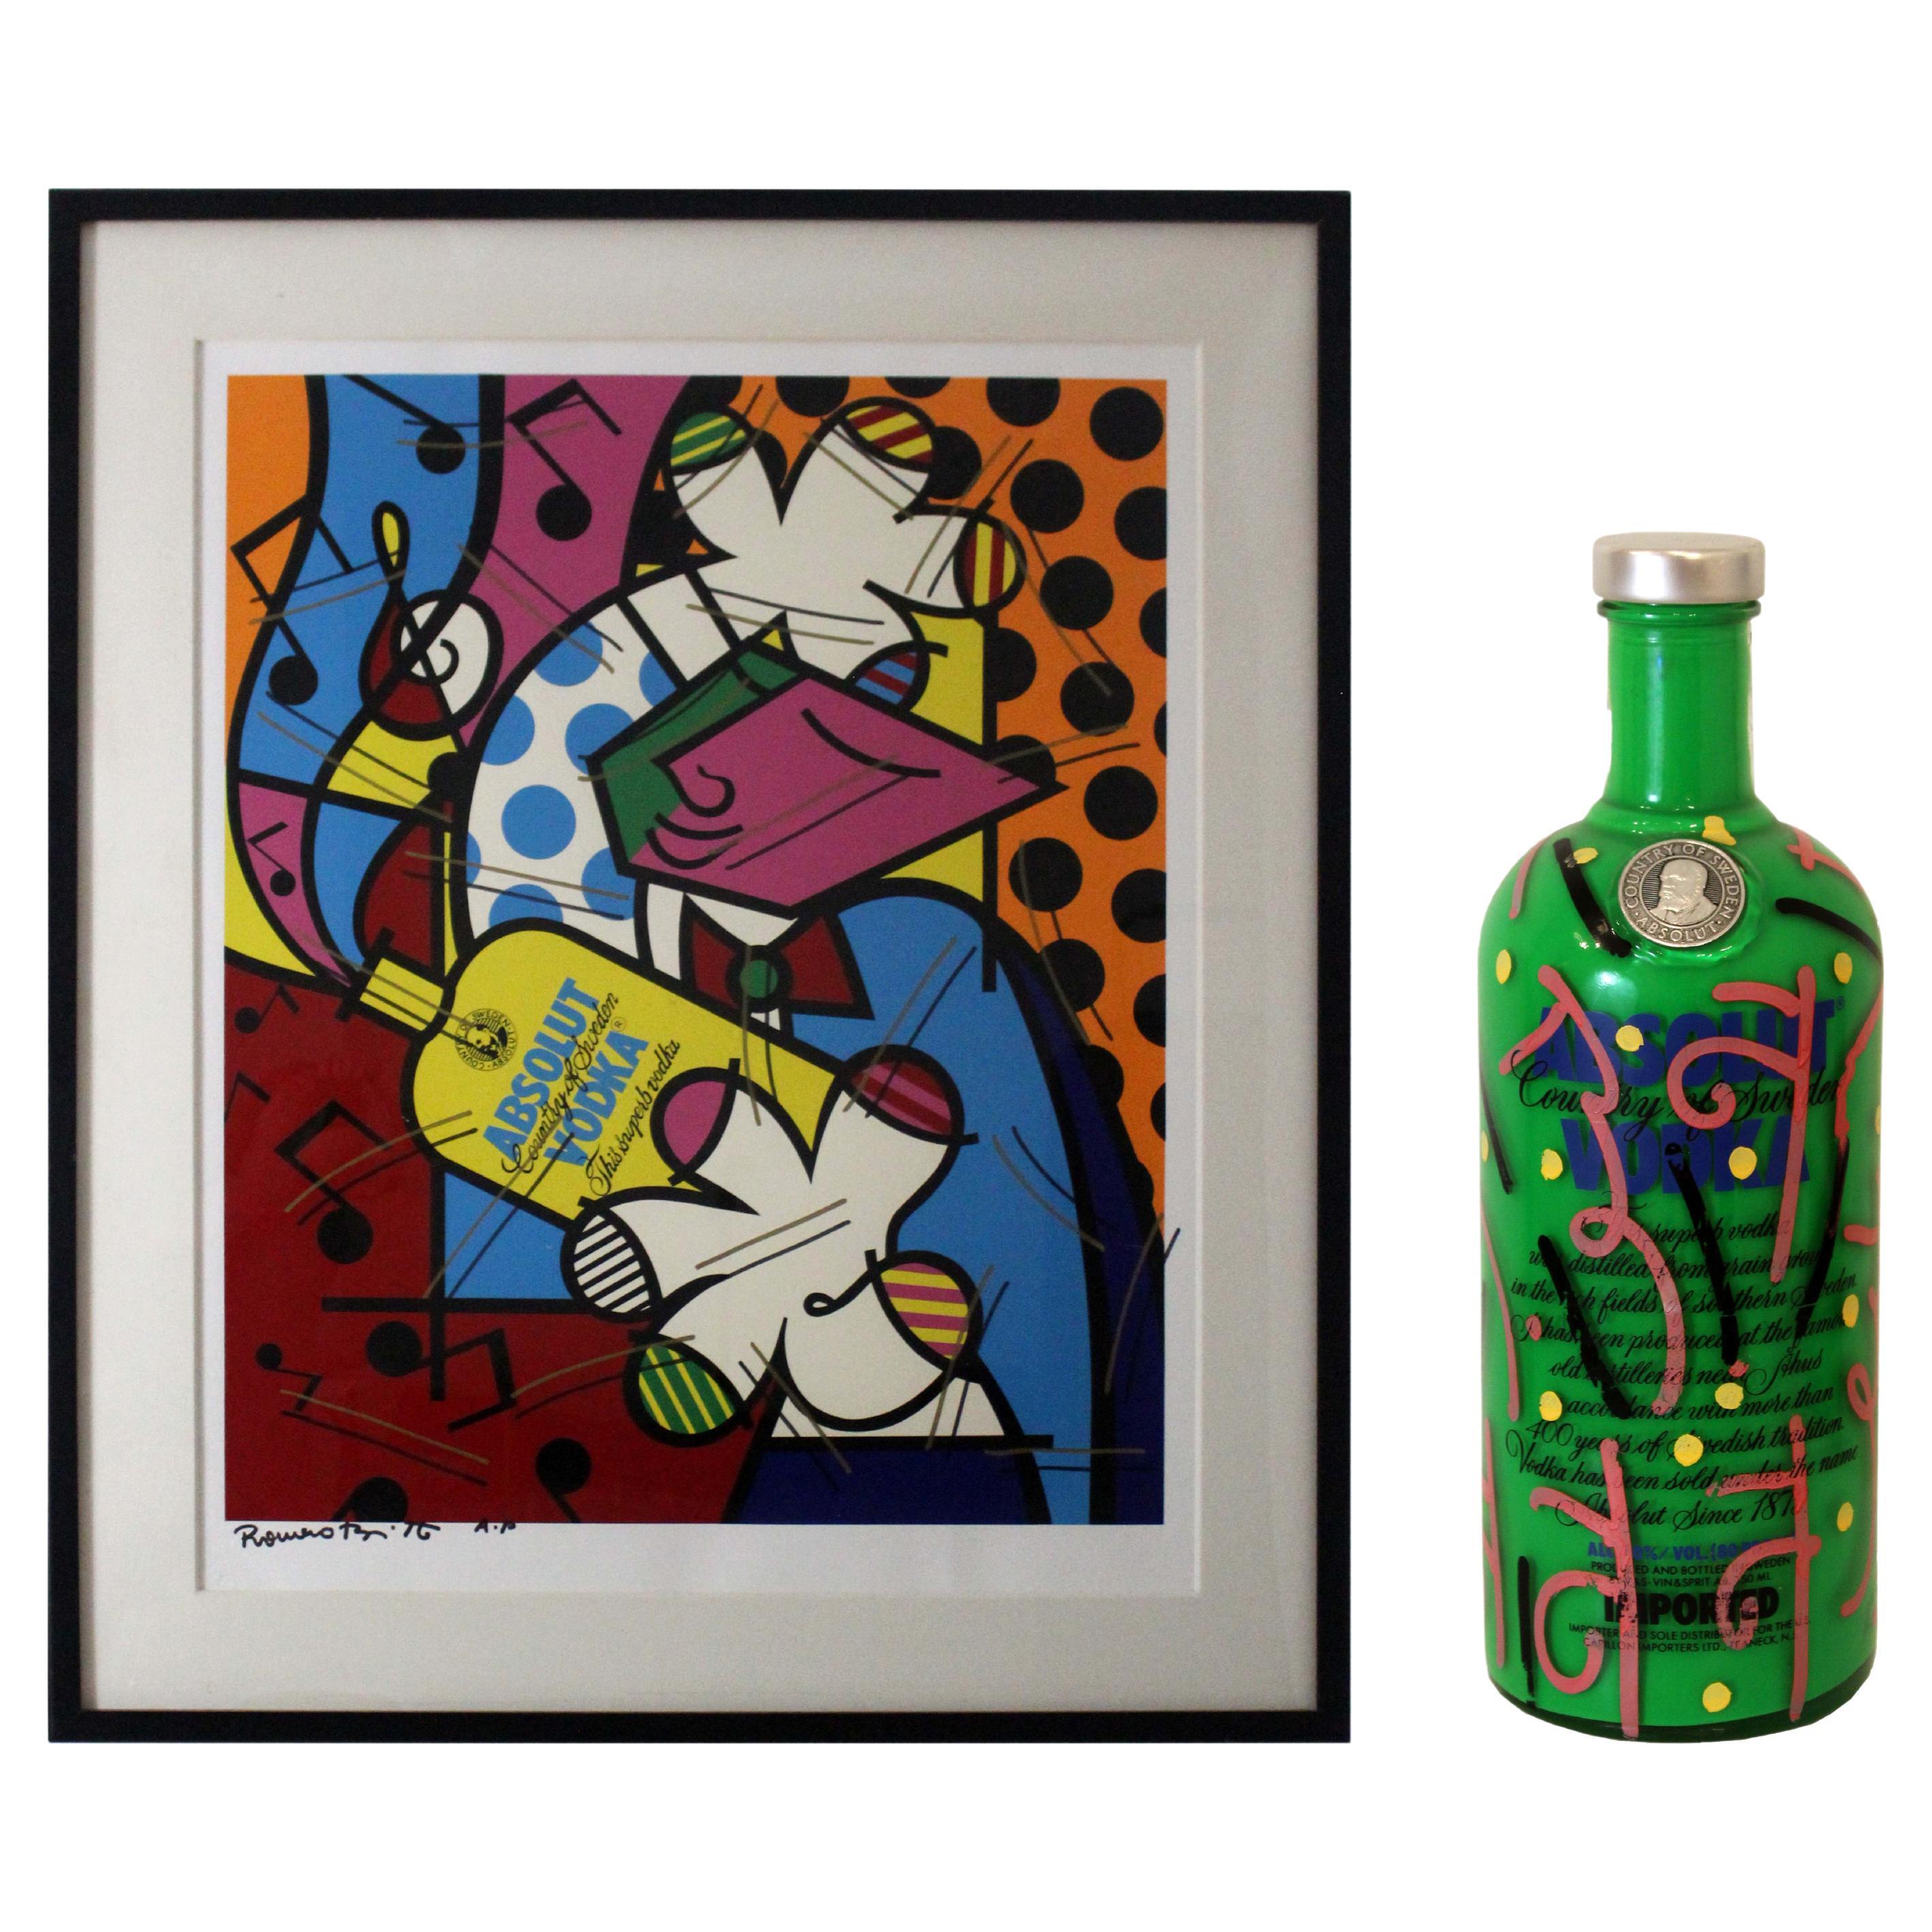 Romero Britto Absolut Vodka Signed Serigraph AP Framed with Absolut Vodka Painte